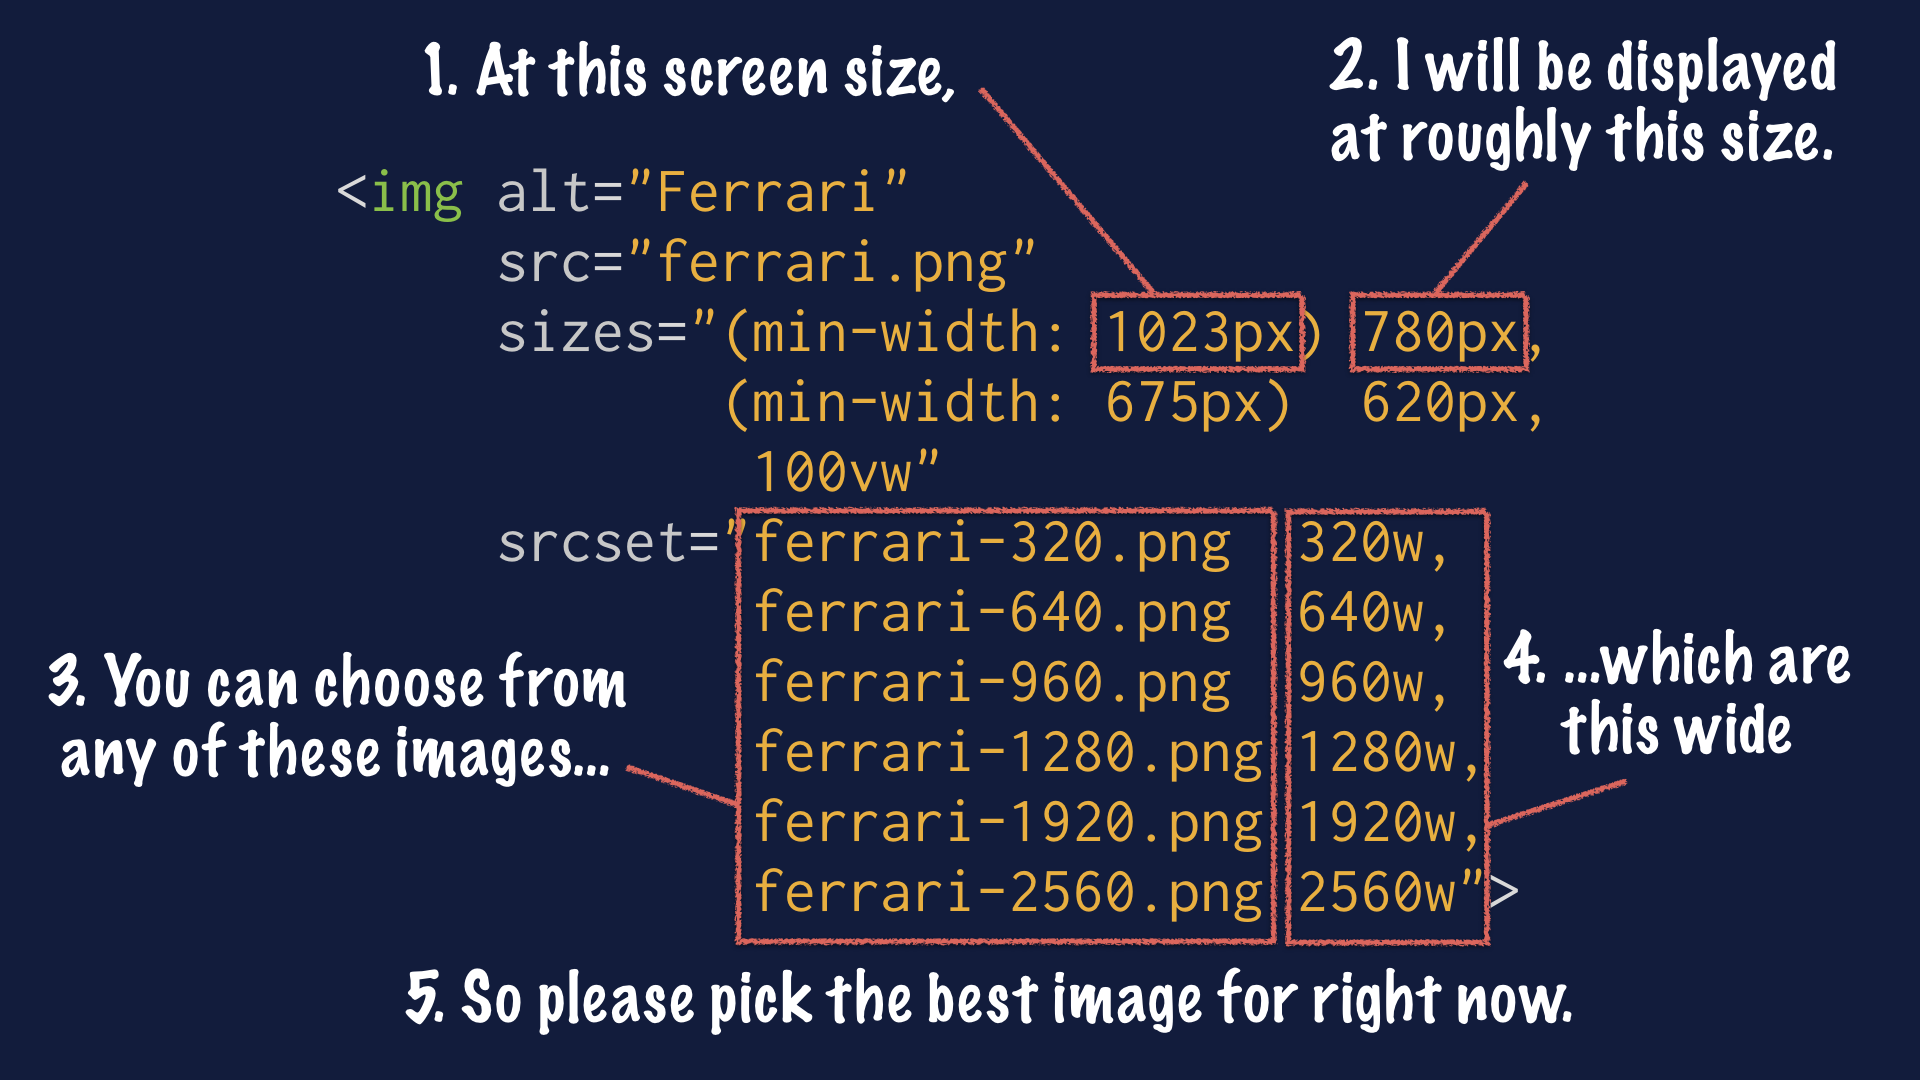 Labeled screenshot of responsive image code example, saying "At this screen size I will be displayed at roughly this size (pointing to the sizes attribute). You can choose from any of these images, which are this wide (pointing to the srcset attribute). So please pick the best image for right now."